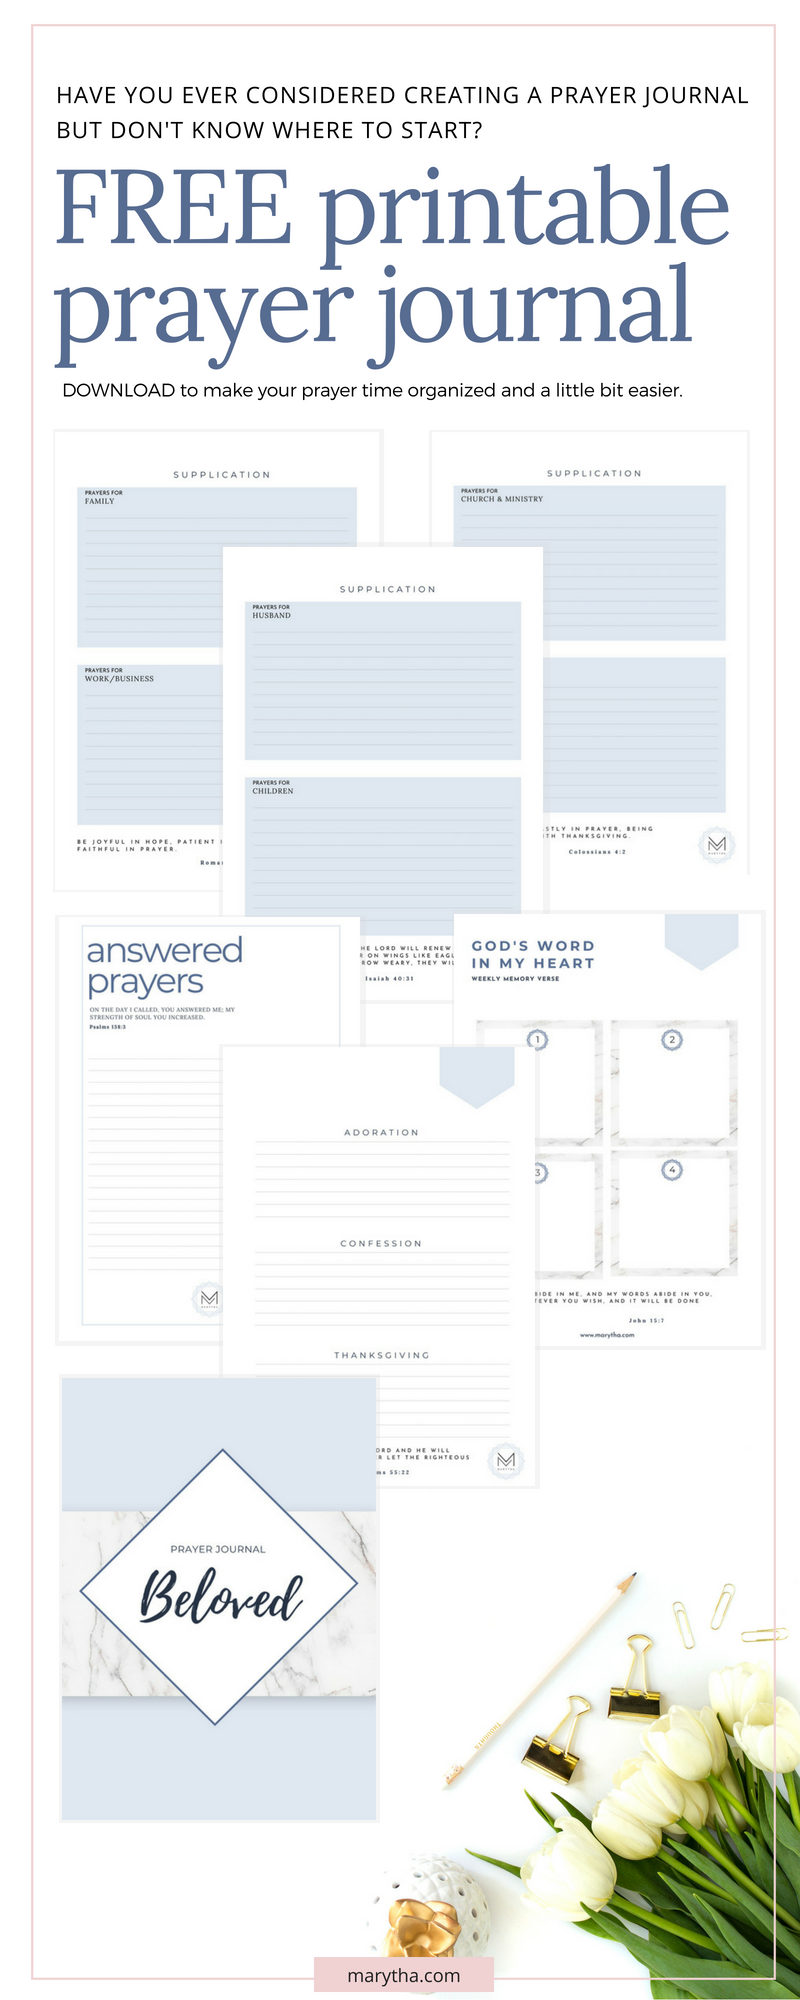 When Prayer Becomes Difficult + FREE printable prayer journal - Marytha